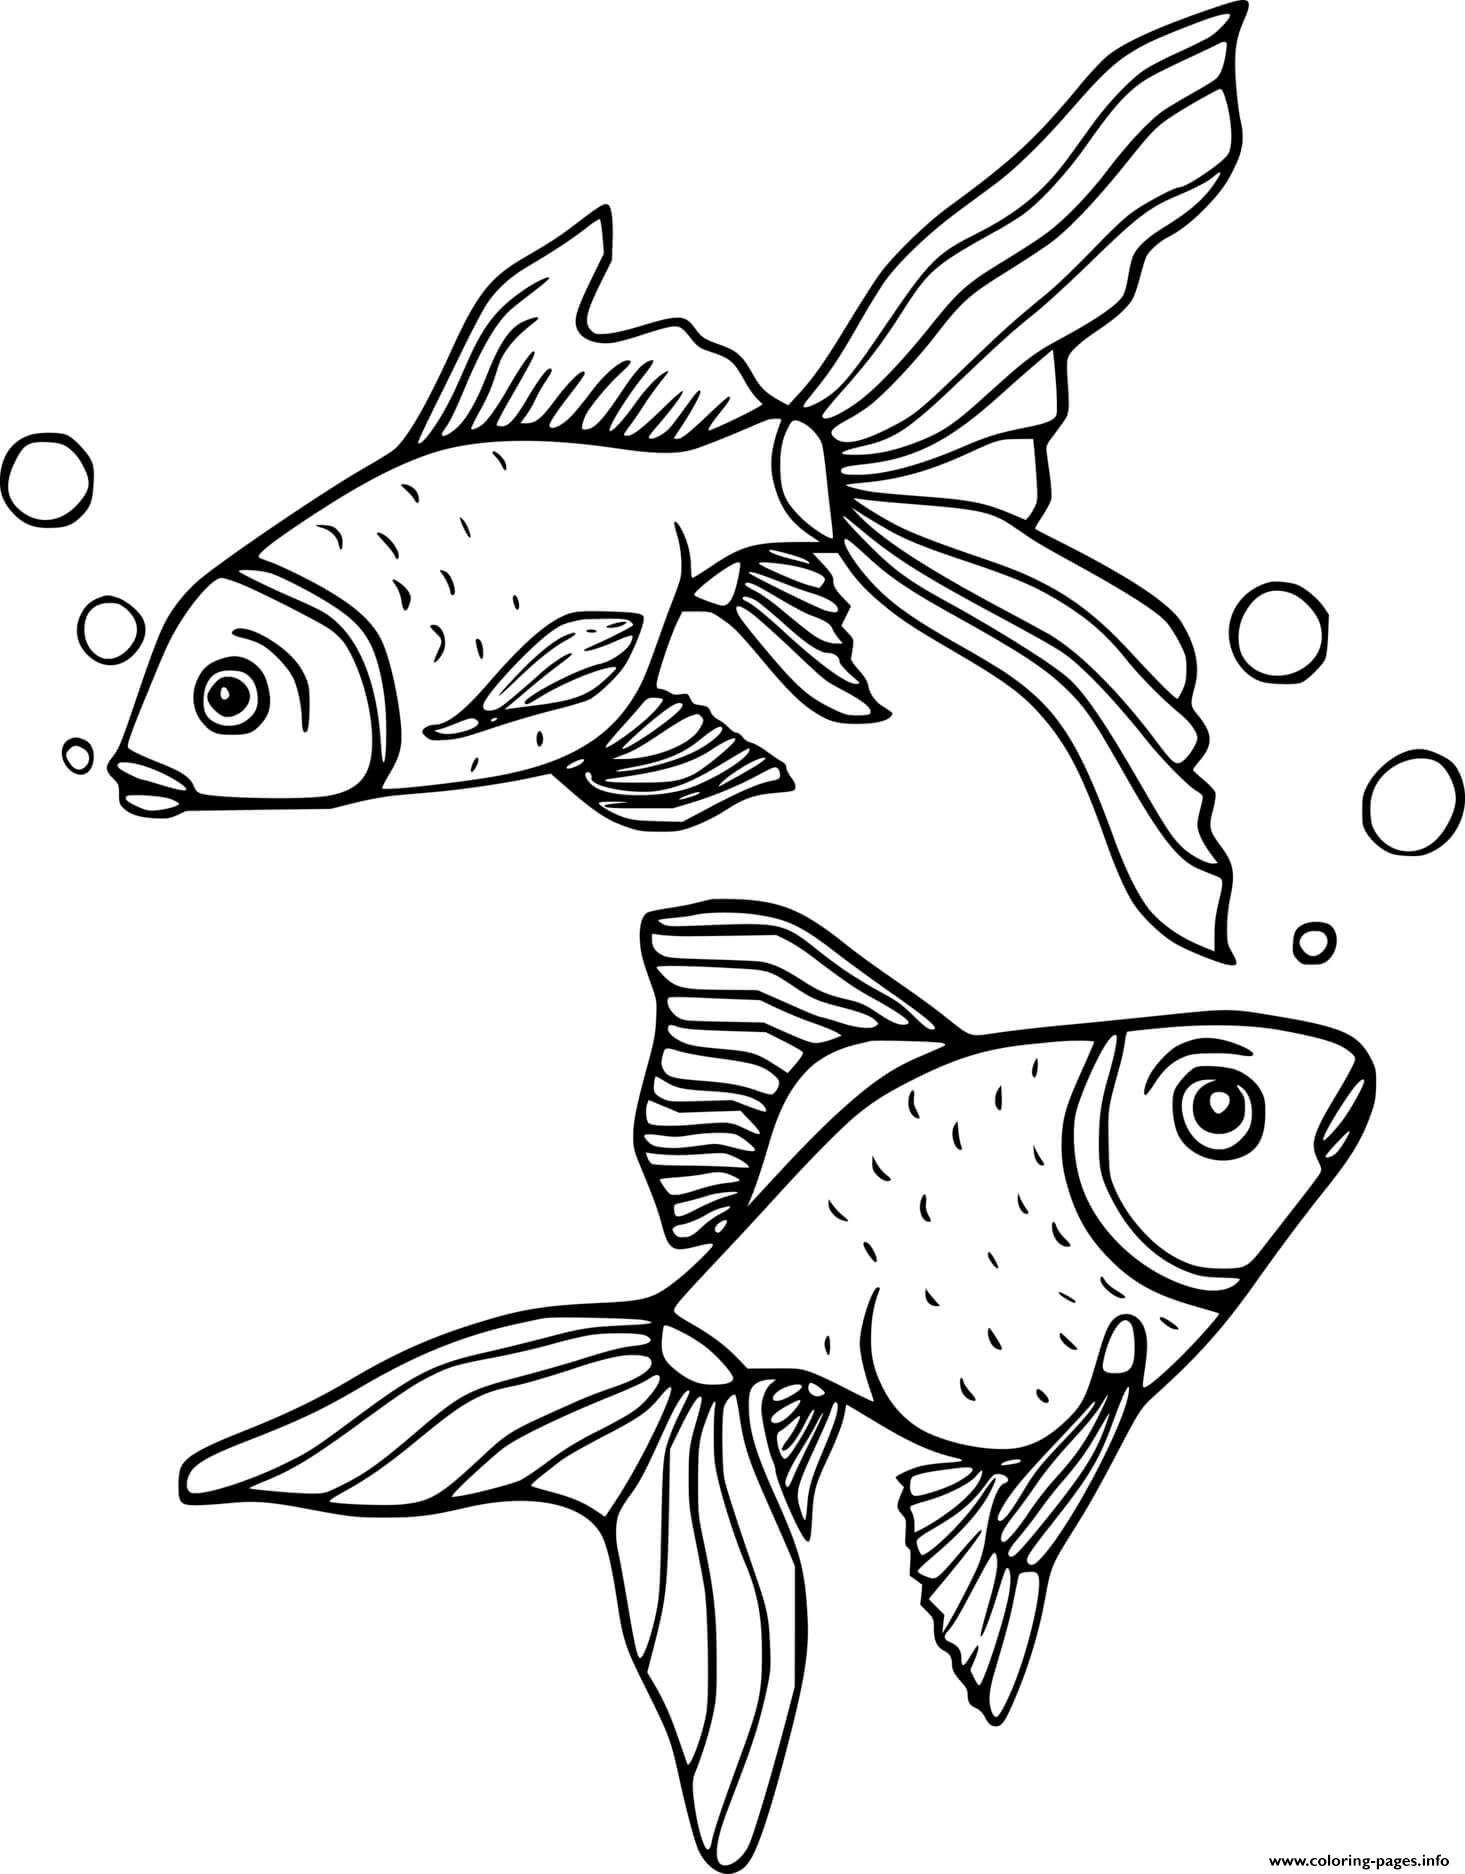 Two Goldfish coloring